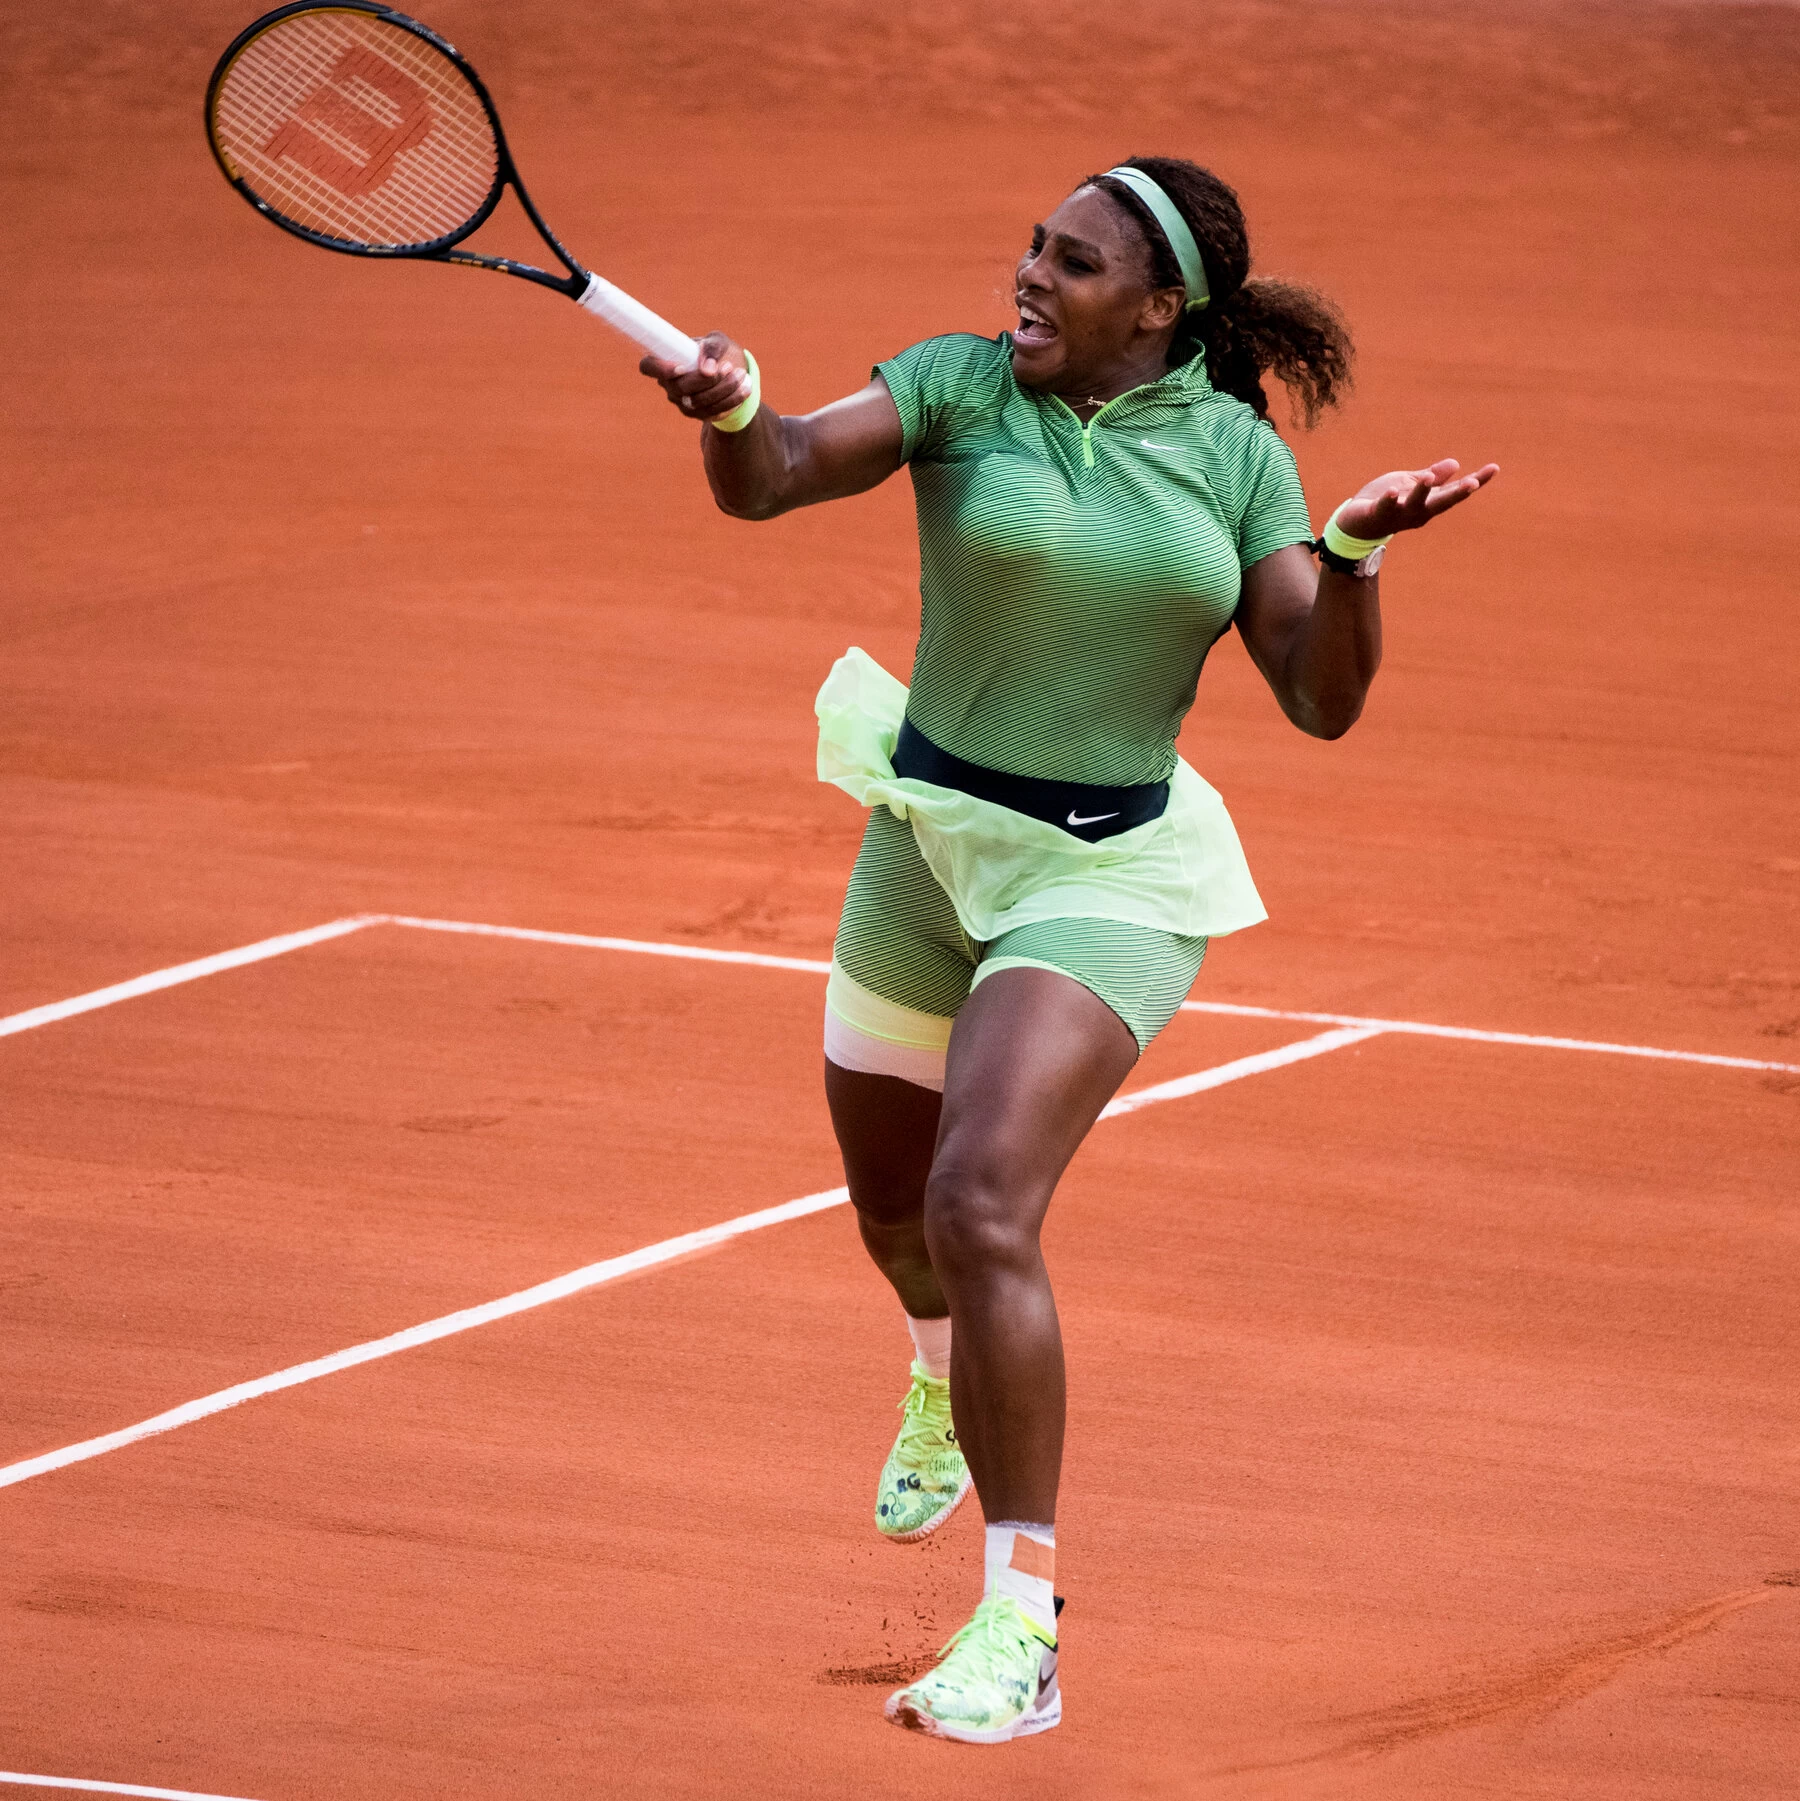 Serena Williams knocked out of French Open in big grand slam upset